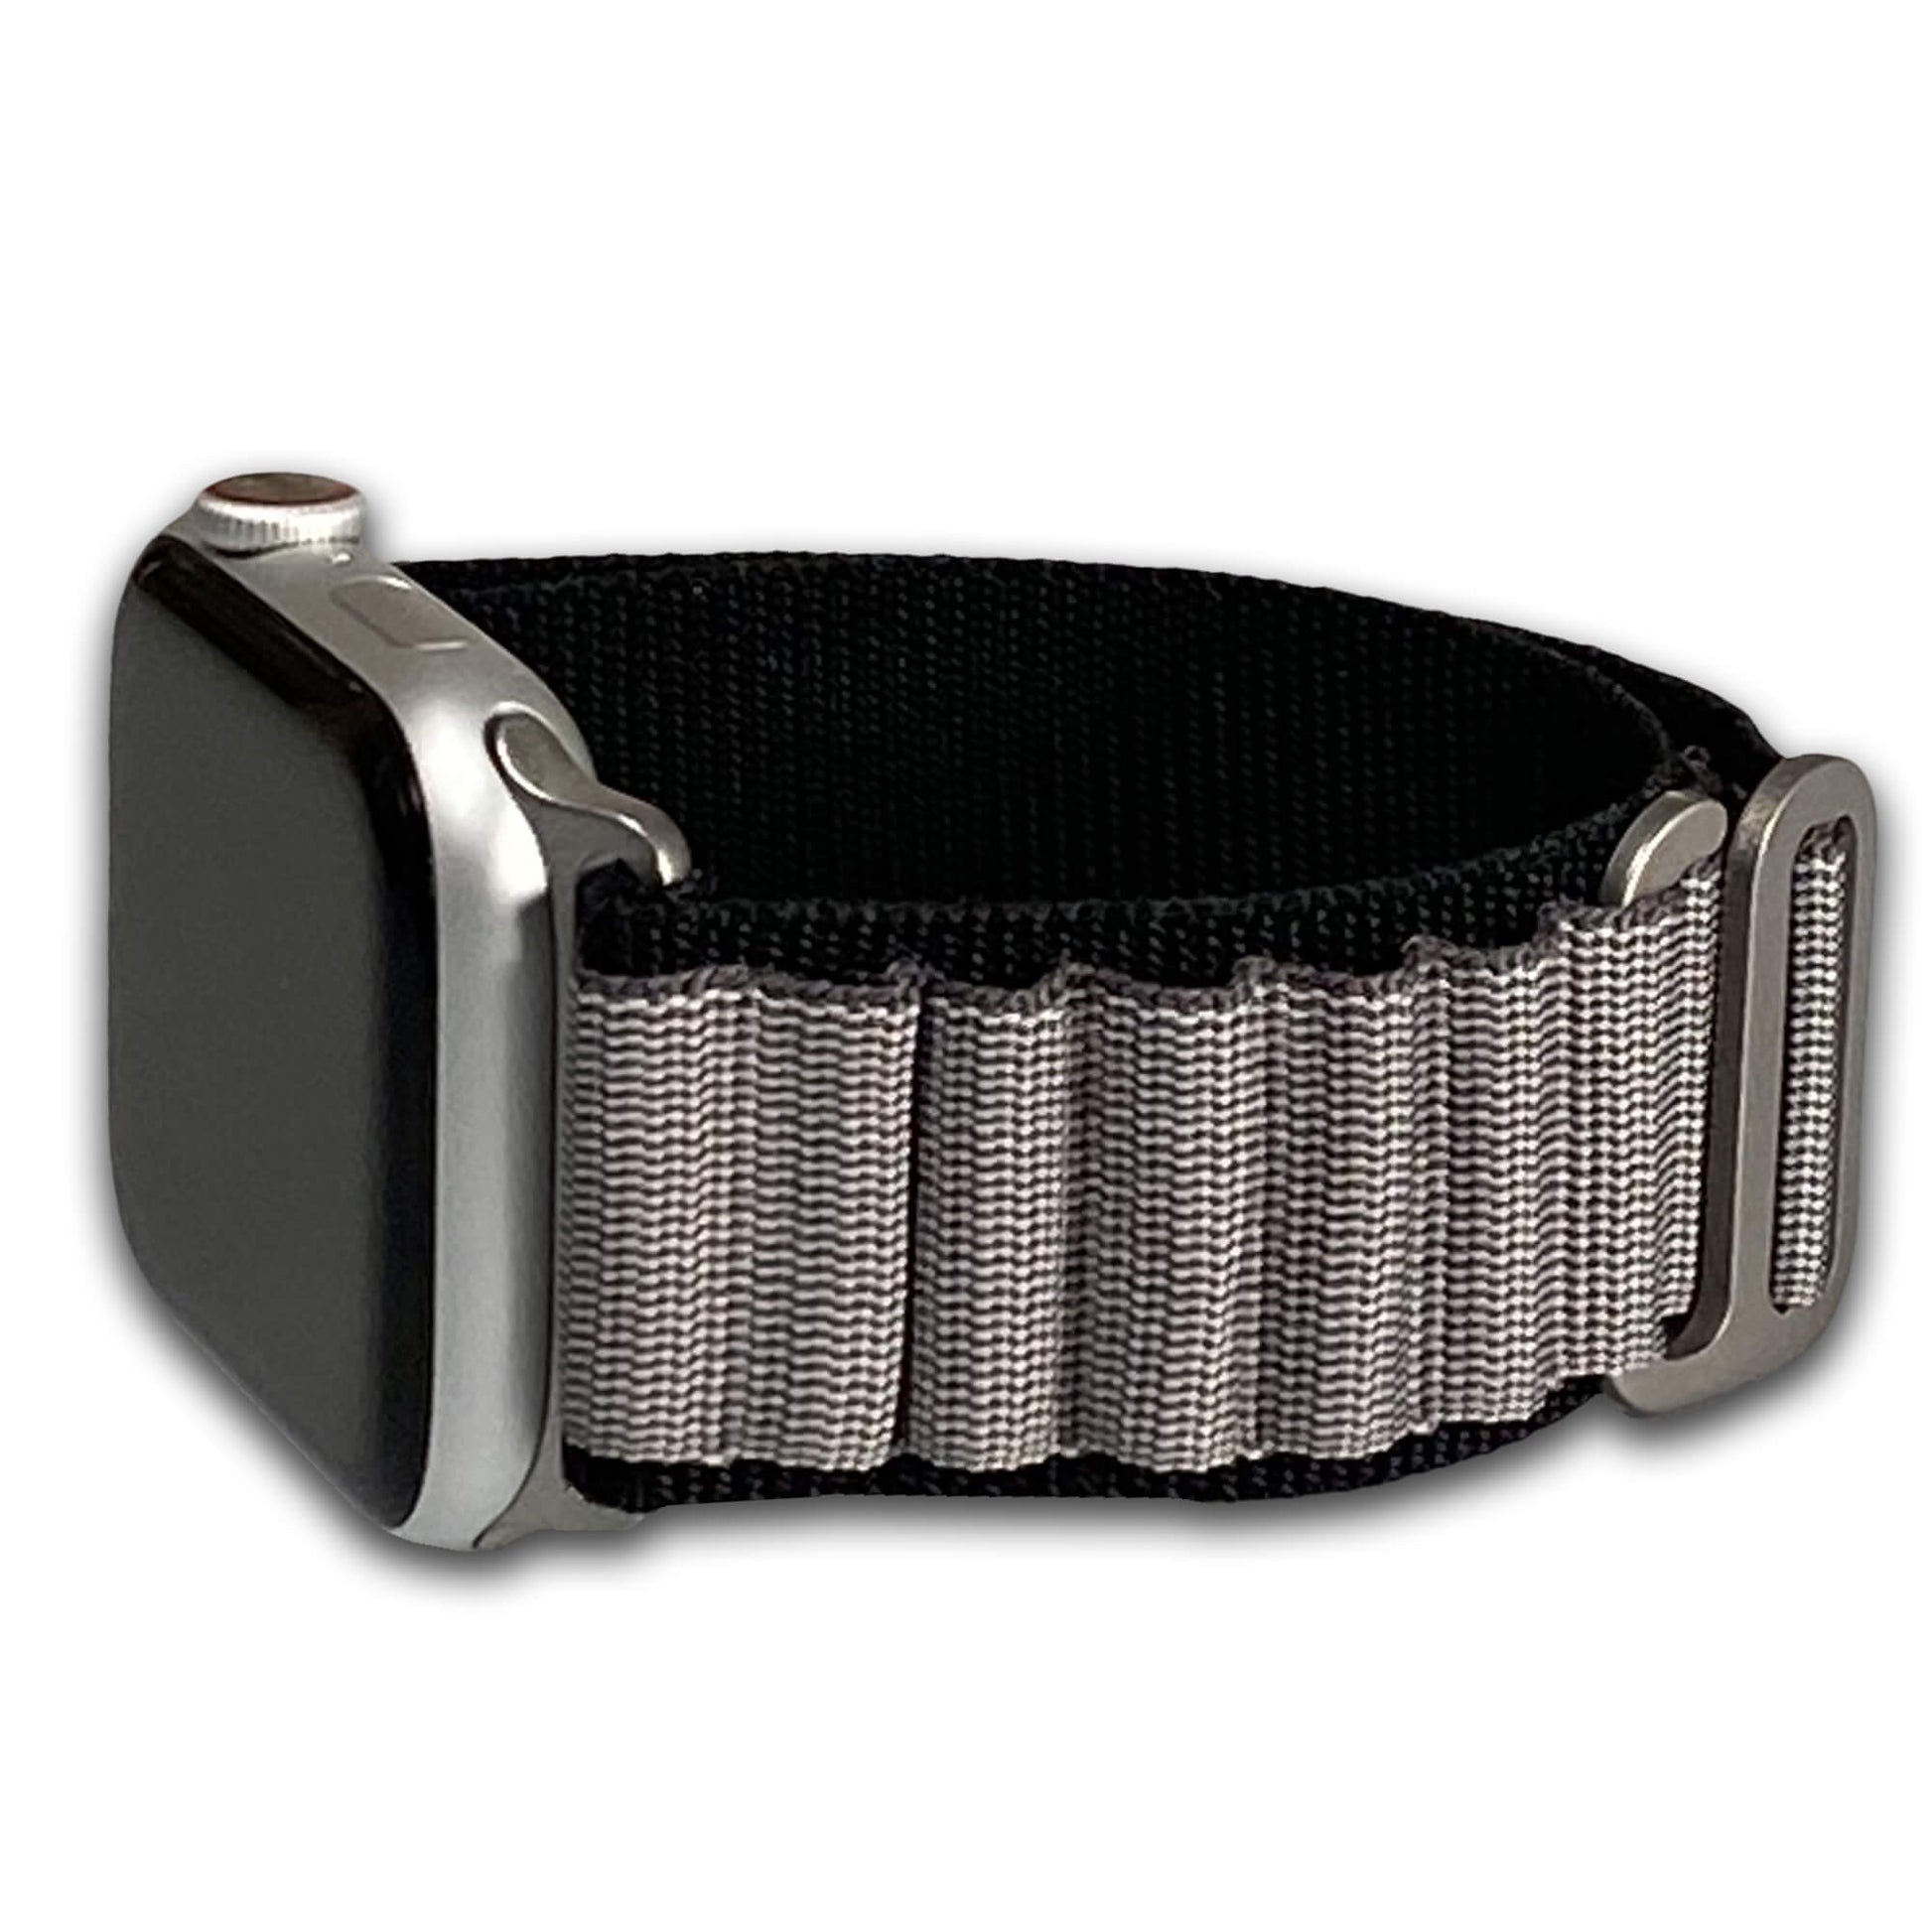 Black-Grey Alpine Loop Nylon Watch Band Compatible with Apple Watch